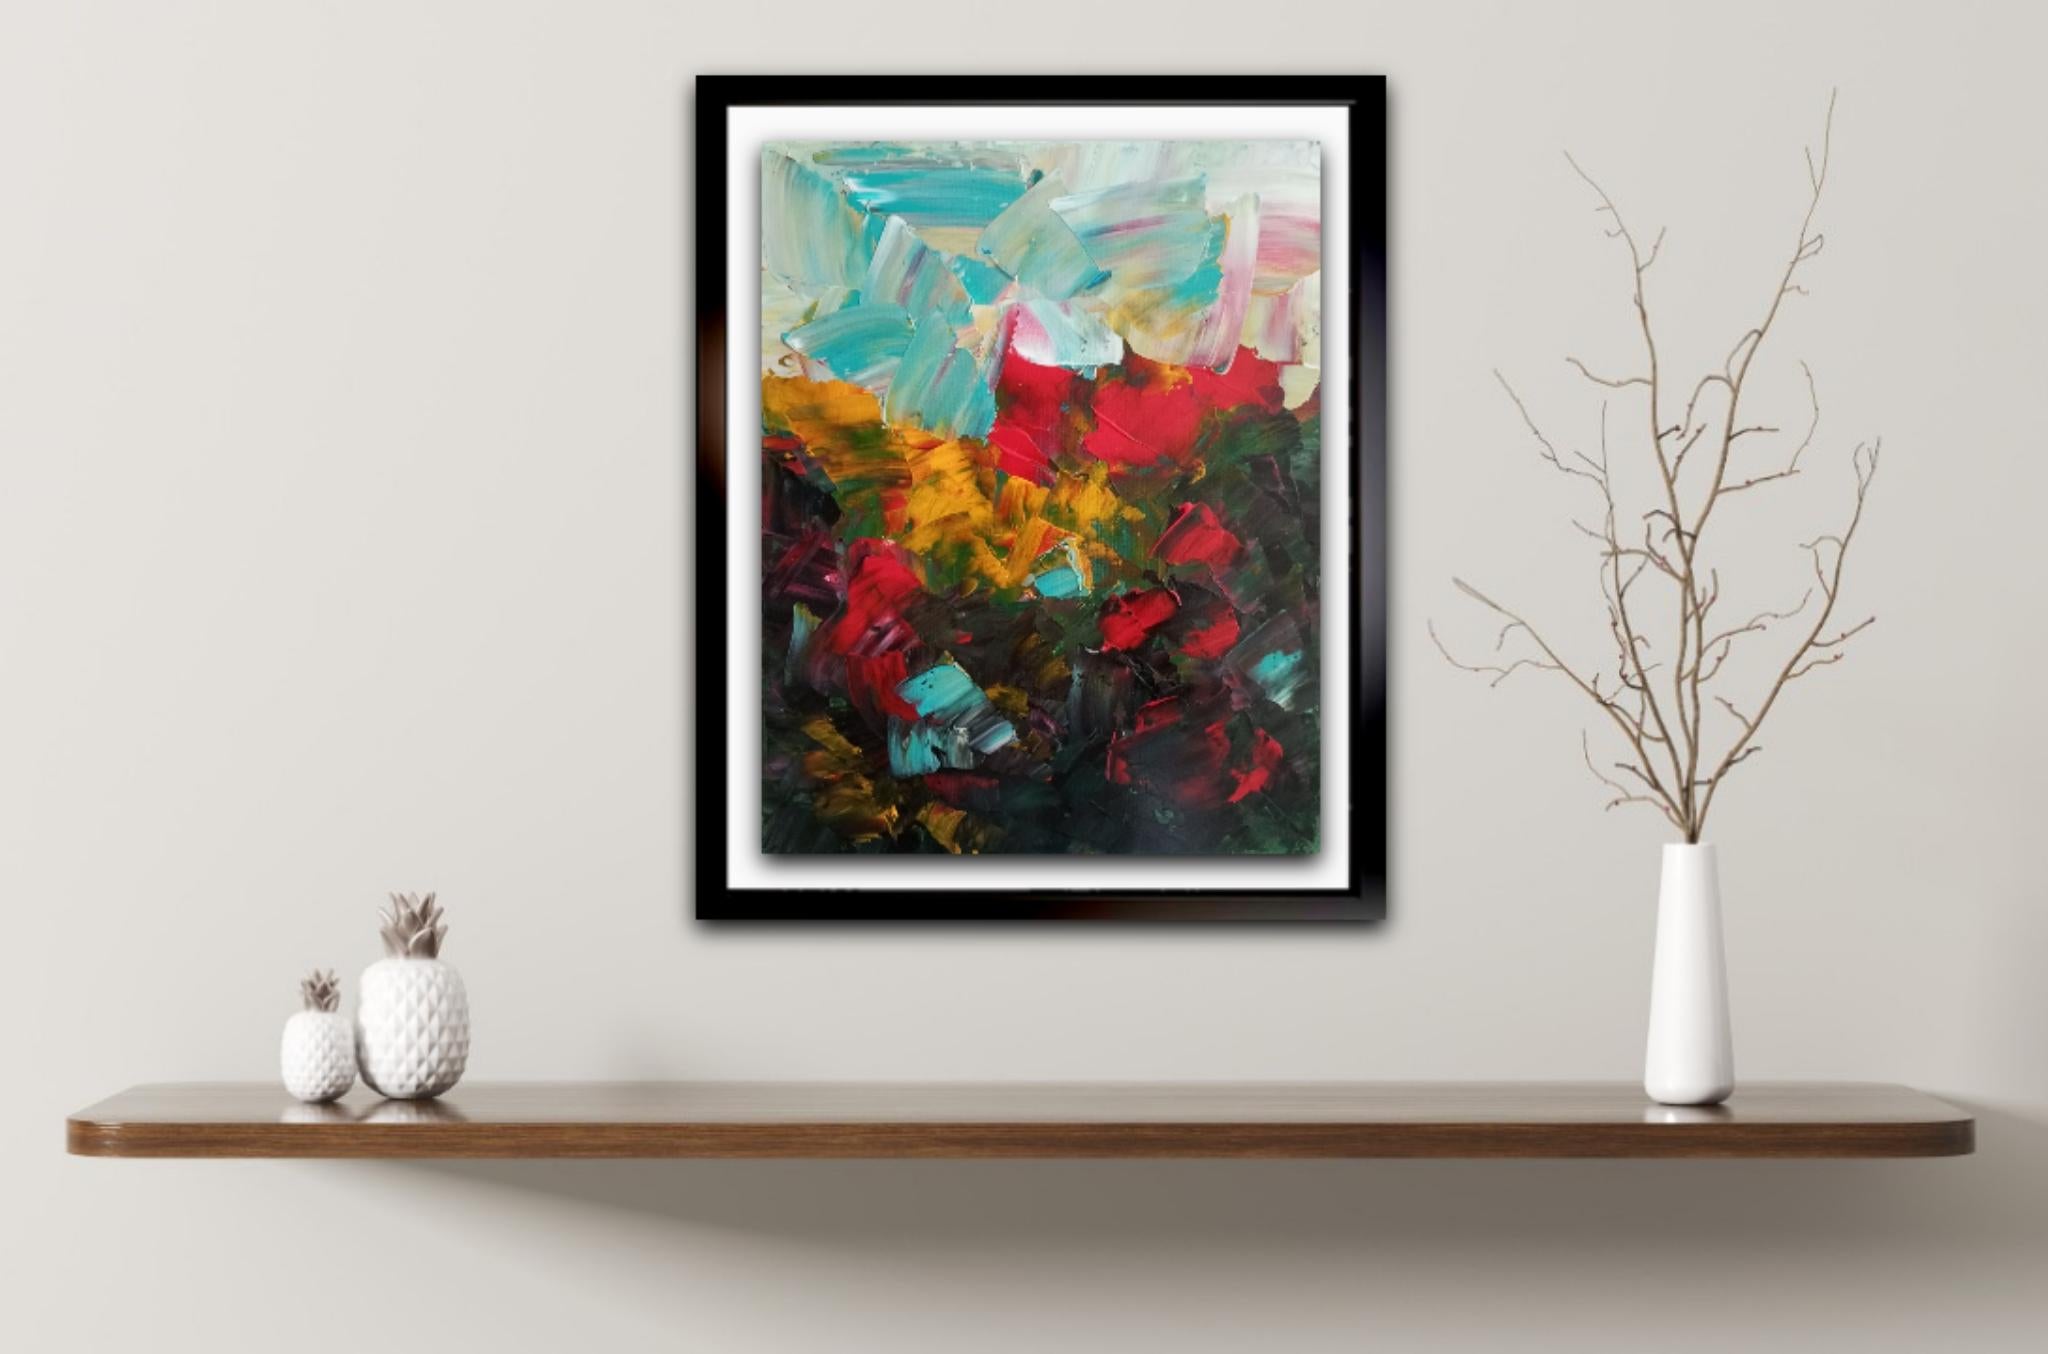 Dear art lover,

This vibrant expressive artwork inspired by nature is called 